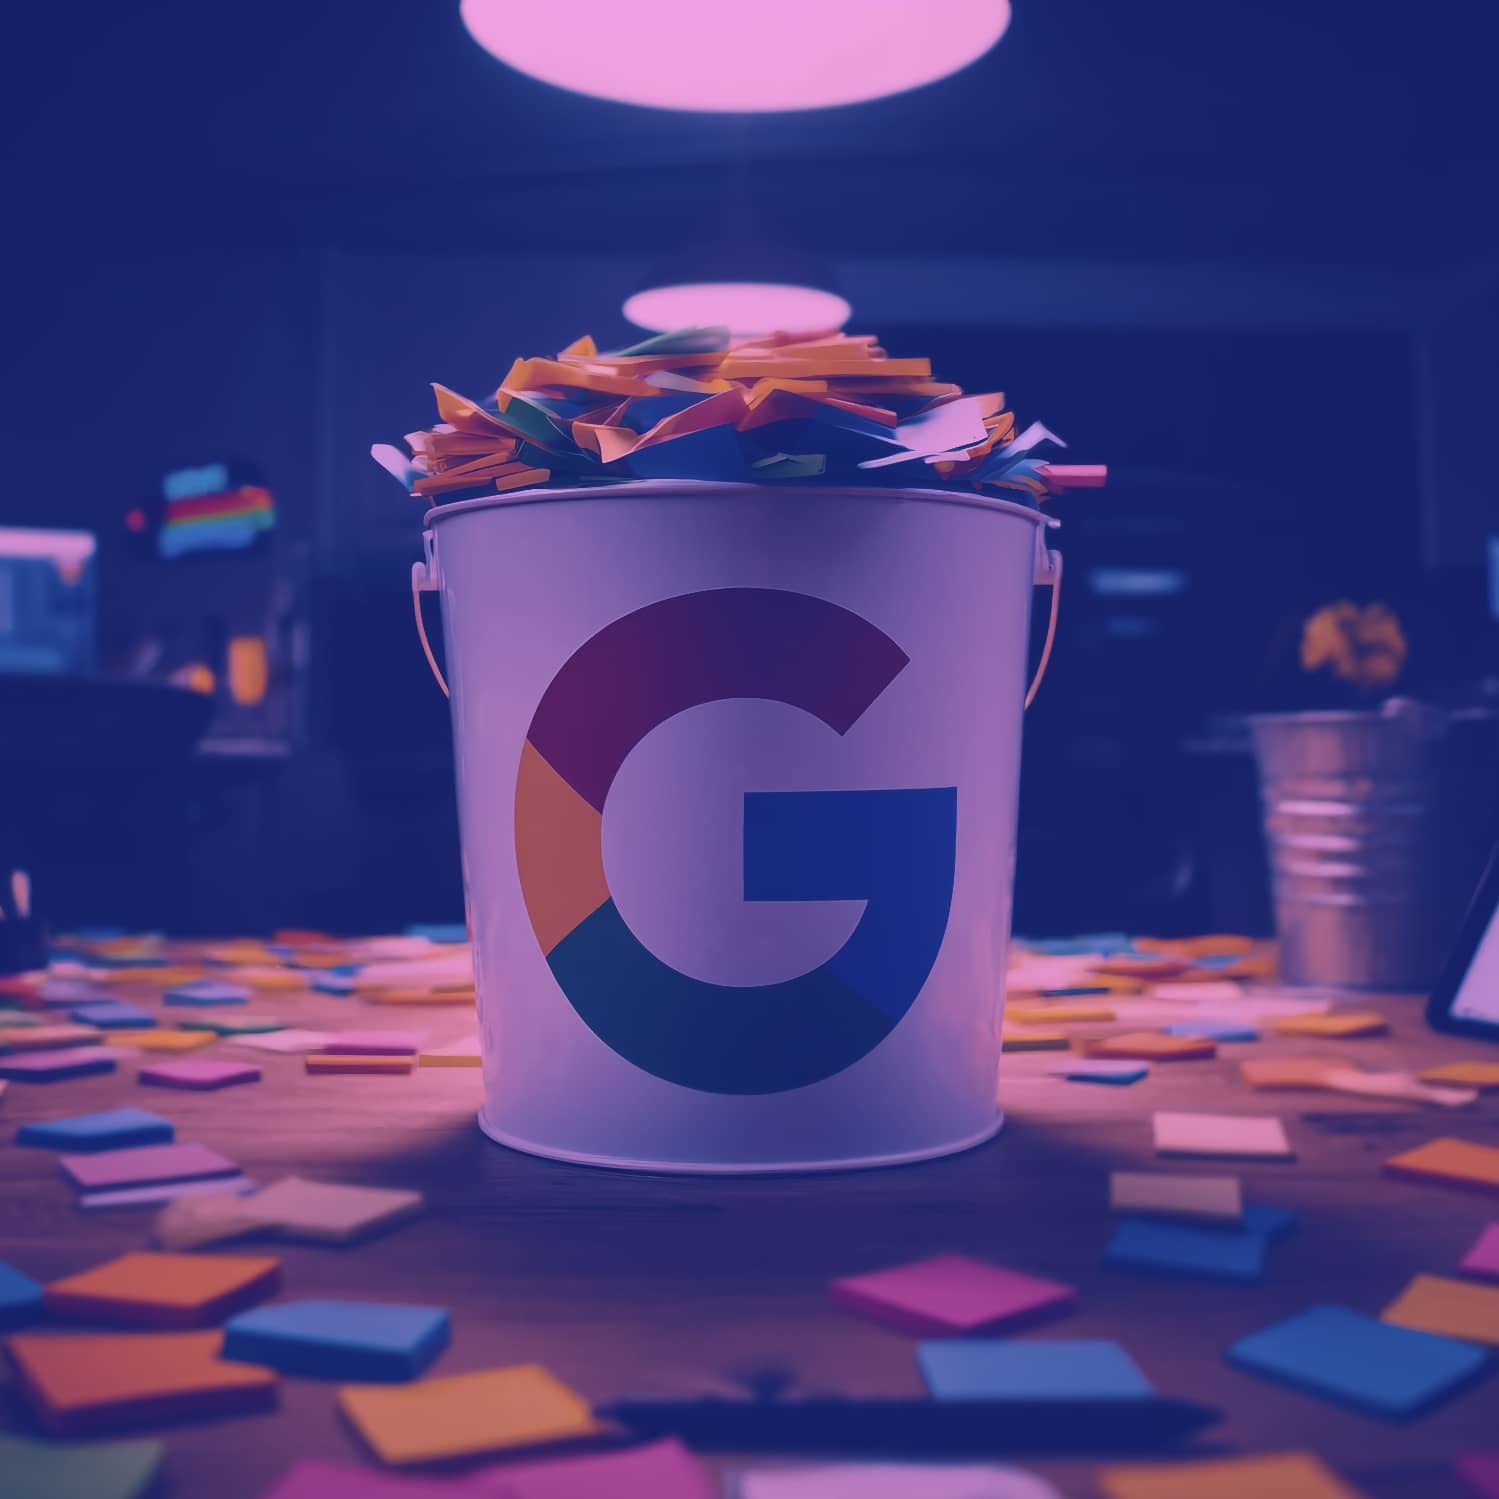 The 'Other' Bucket: What is Google Ads Hiding?